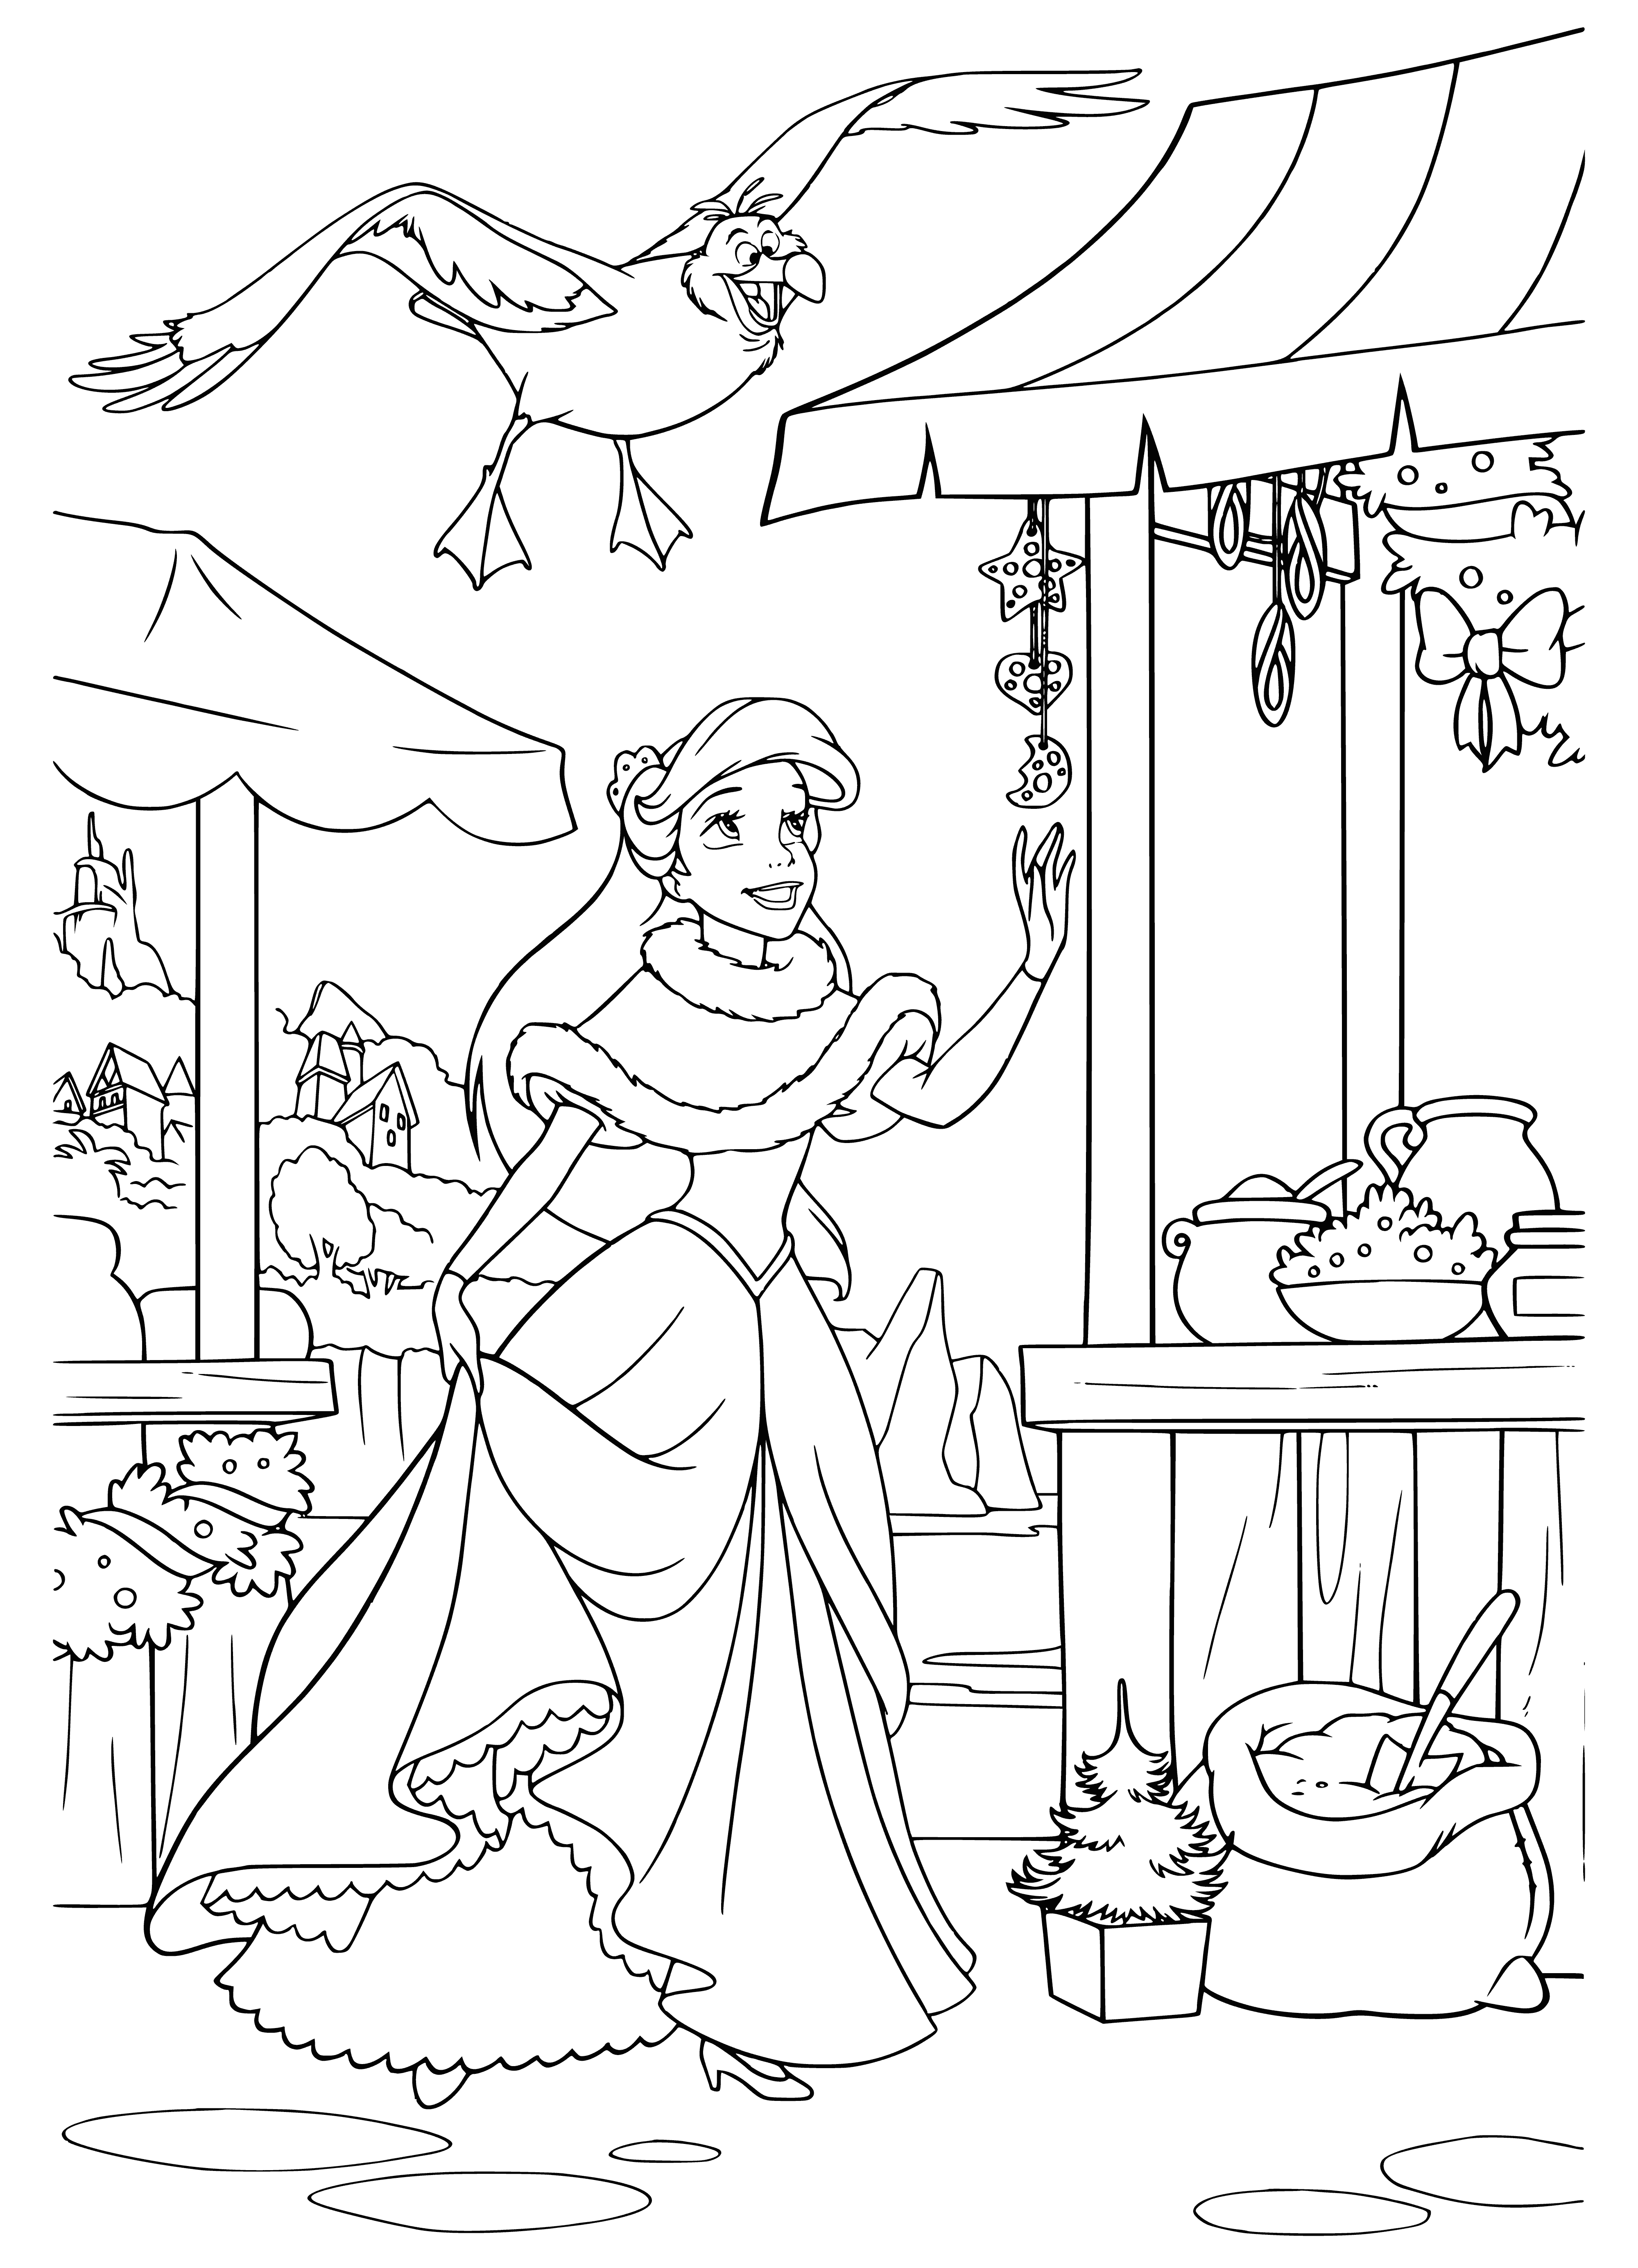 coloring page: Mermaid celebrates new year surrounded by joyful sea friends while picking decorations. Looks like a lot of fun!